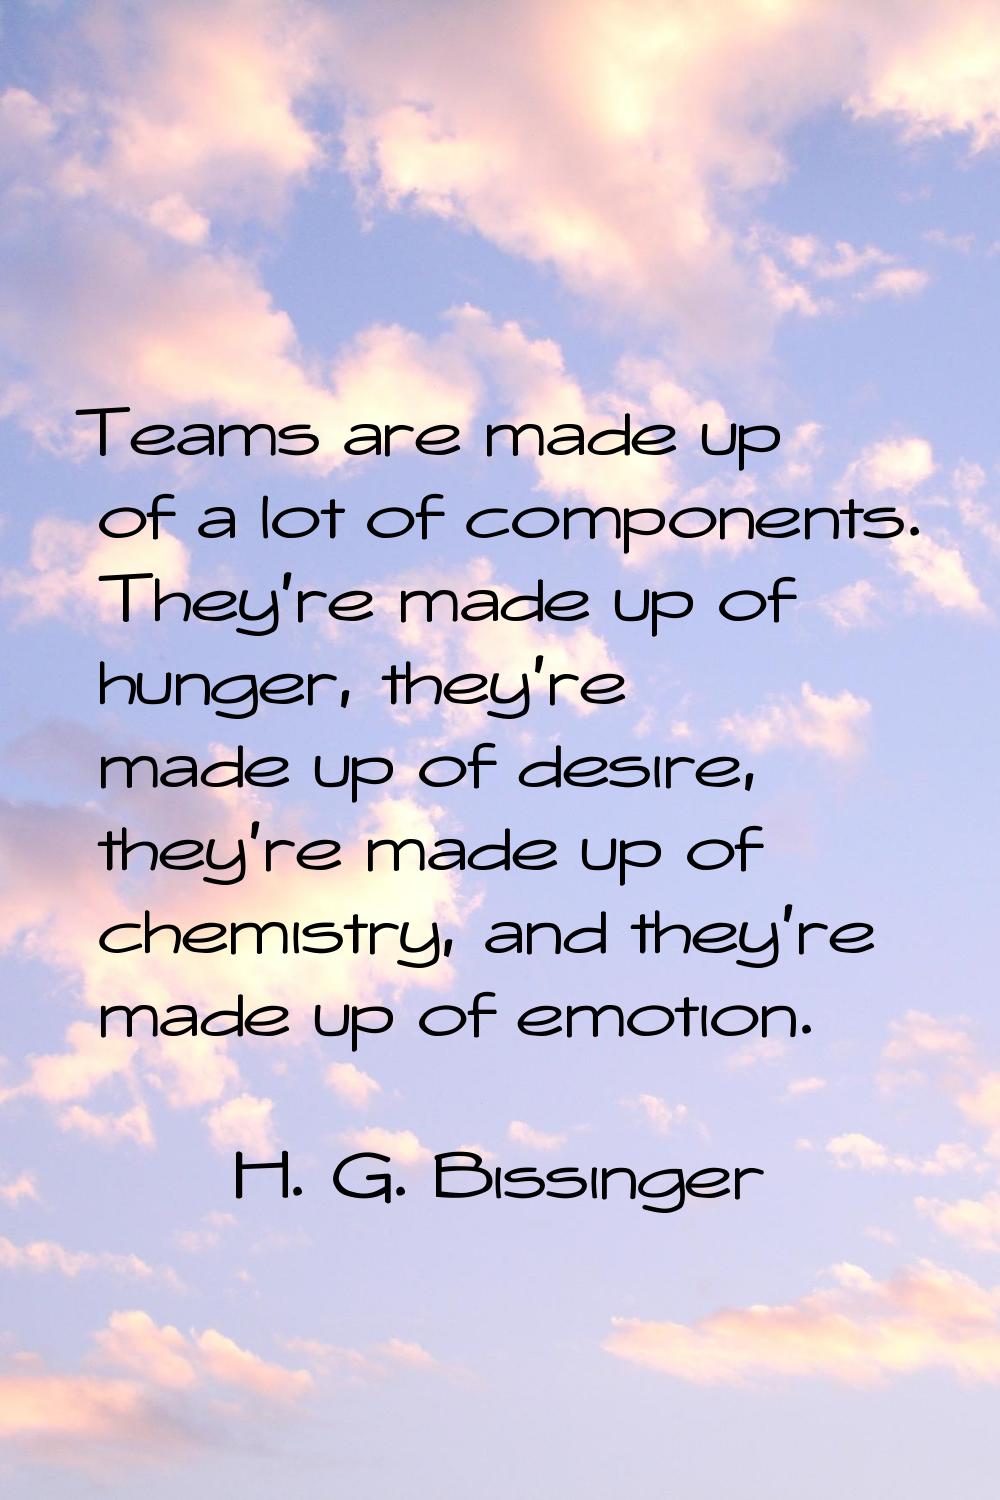 Teams are made up of a lot of components. They're made up of hunger, they're made up of desire, the